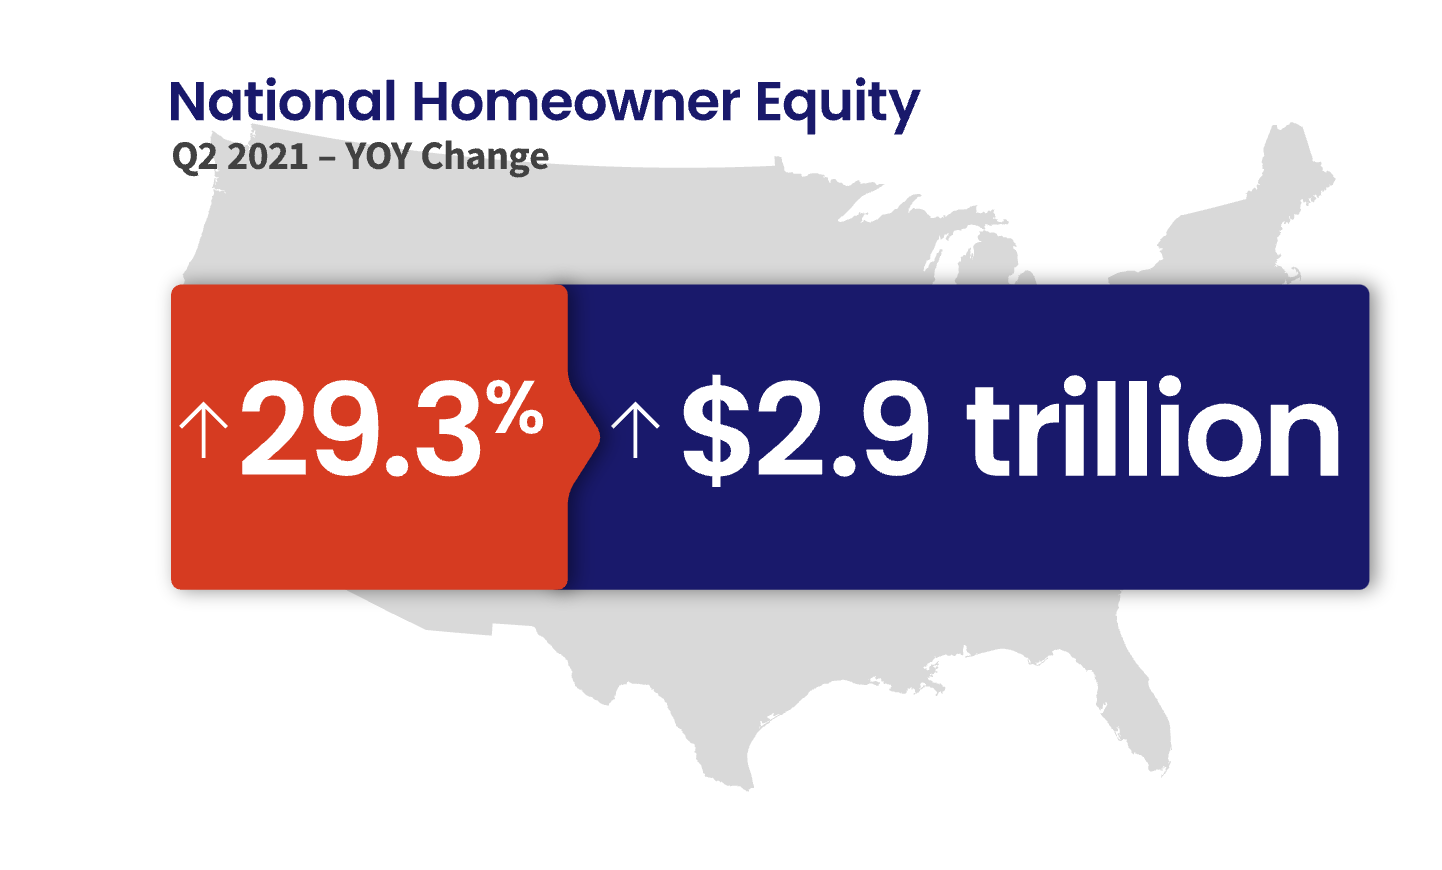 Homeowner Equity up